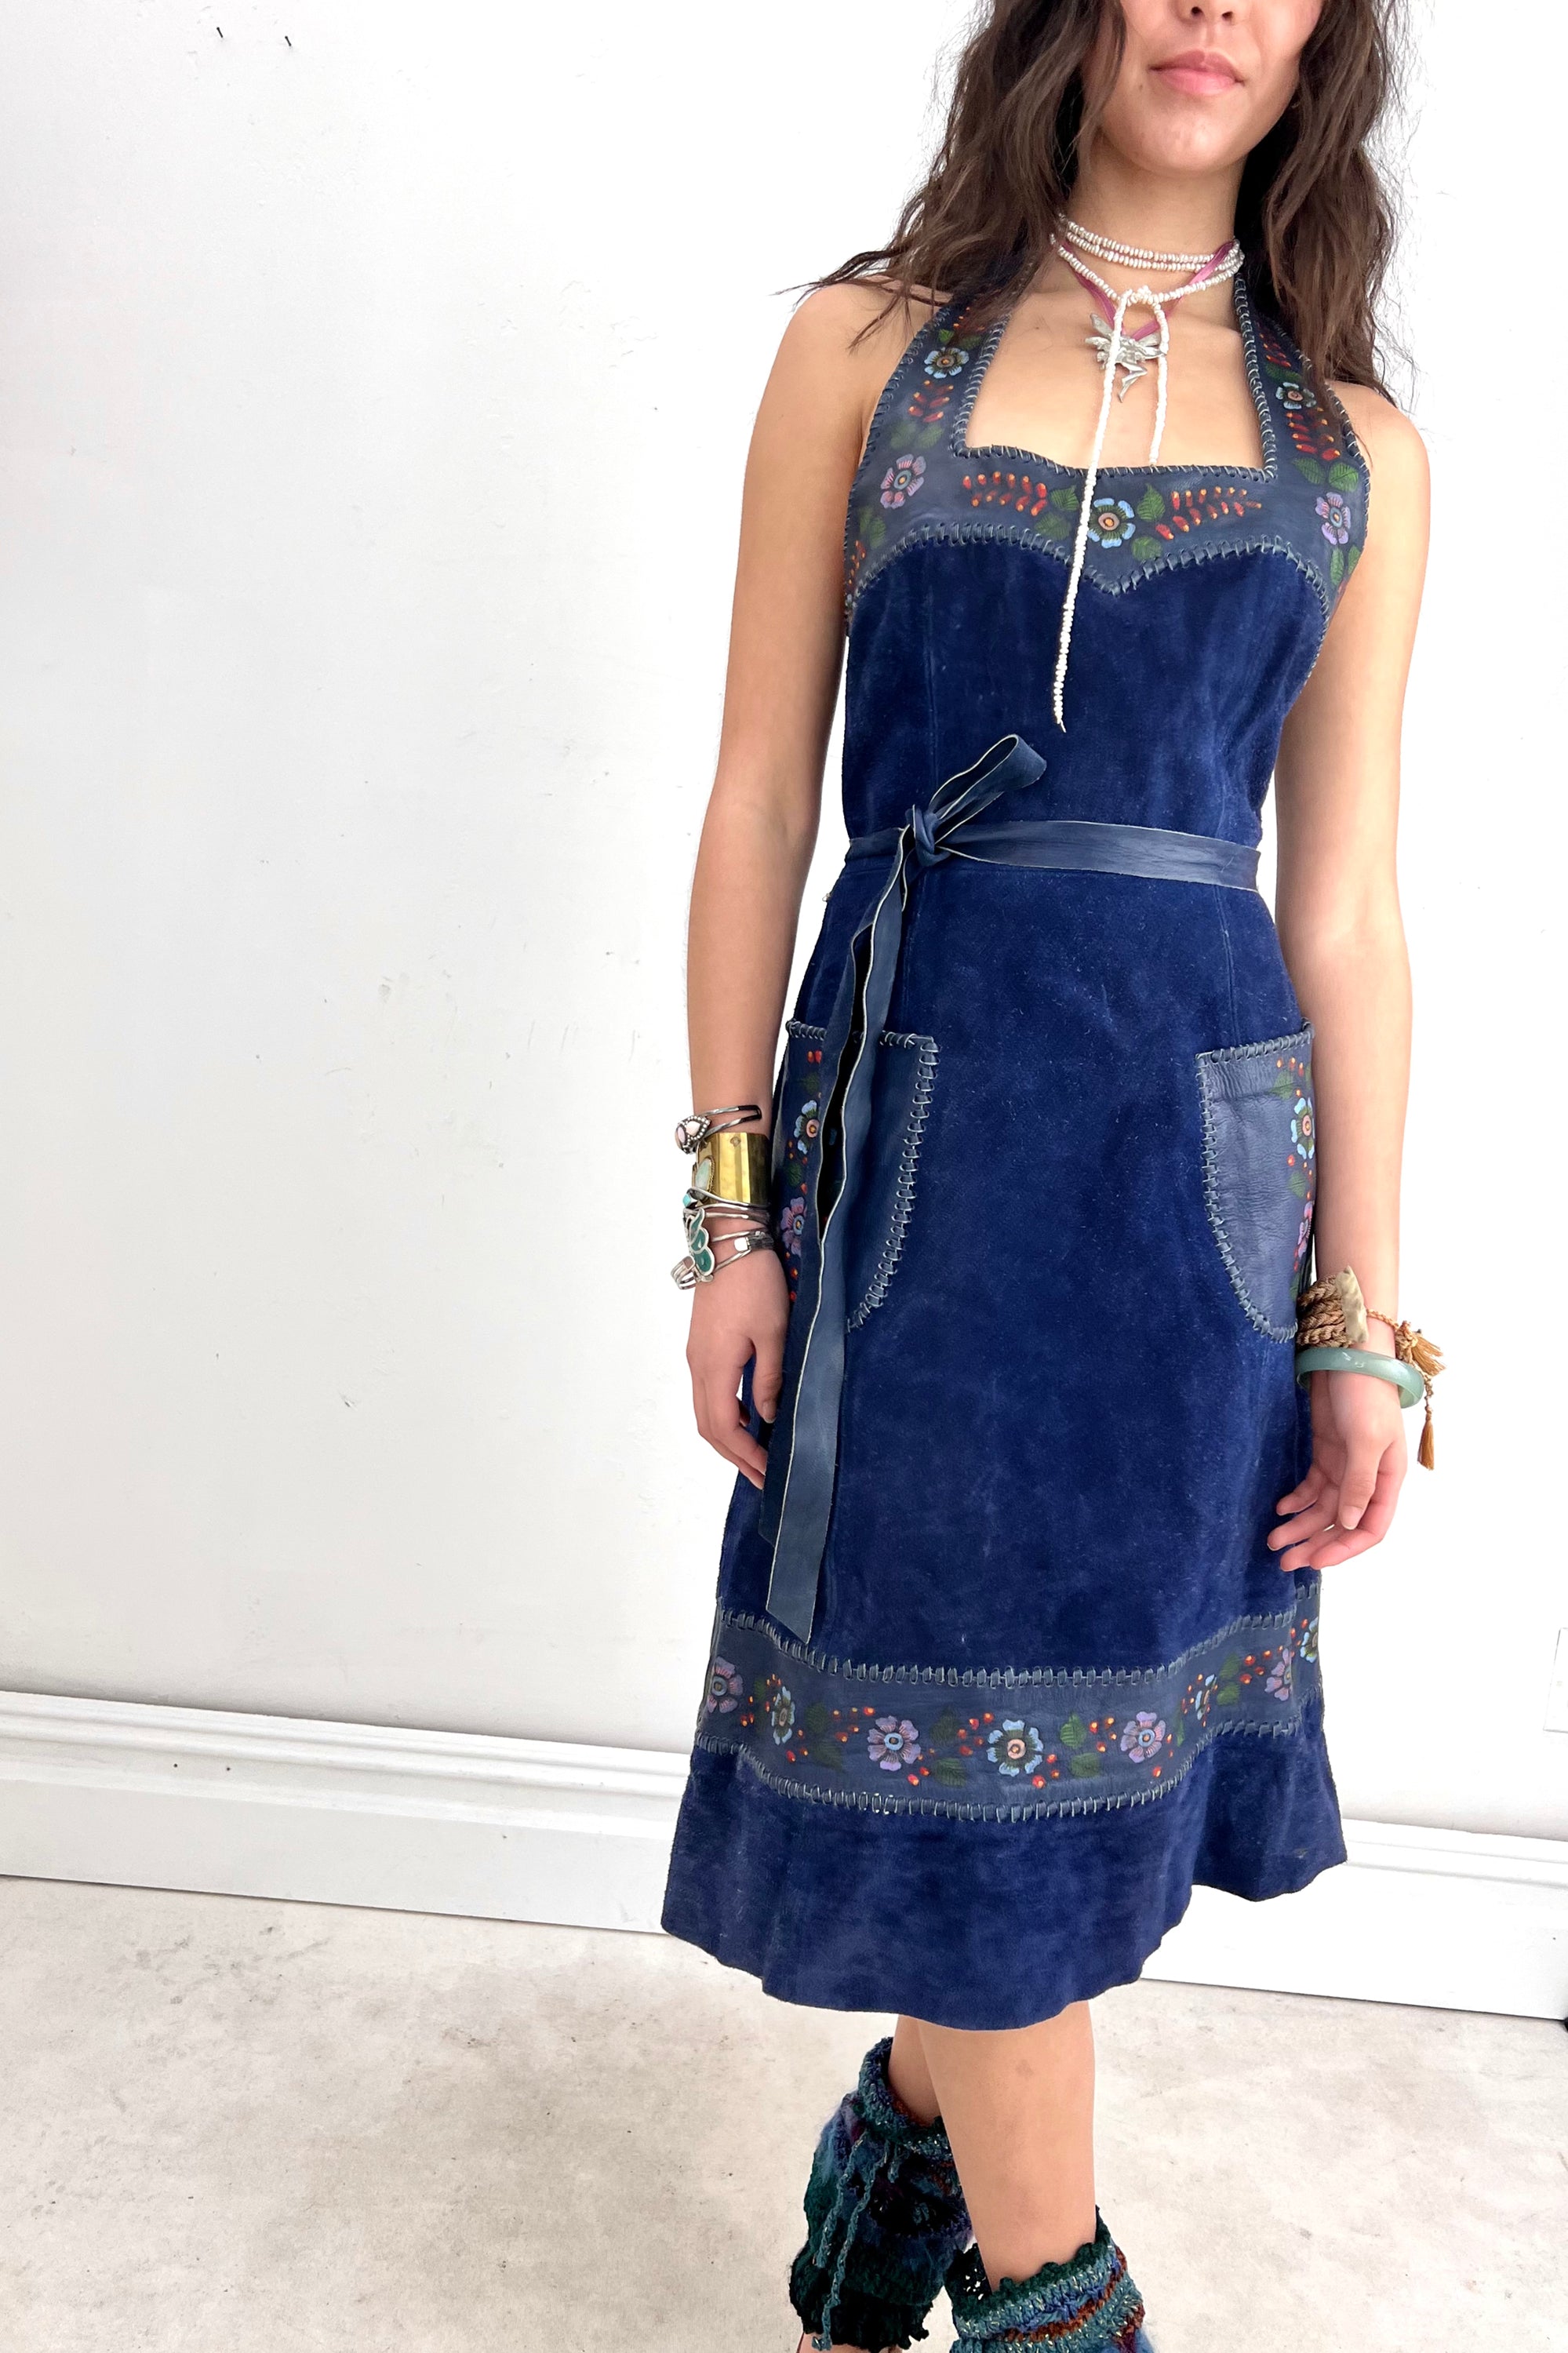 Vintage Char Leather Wrap Dress Selected by Anna Corinna